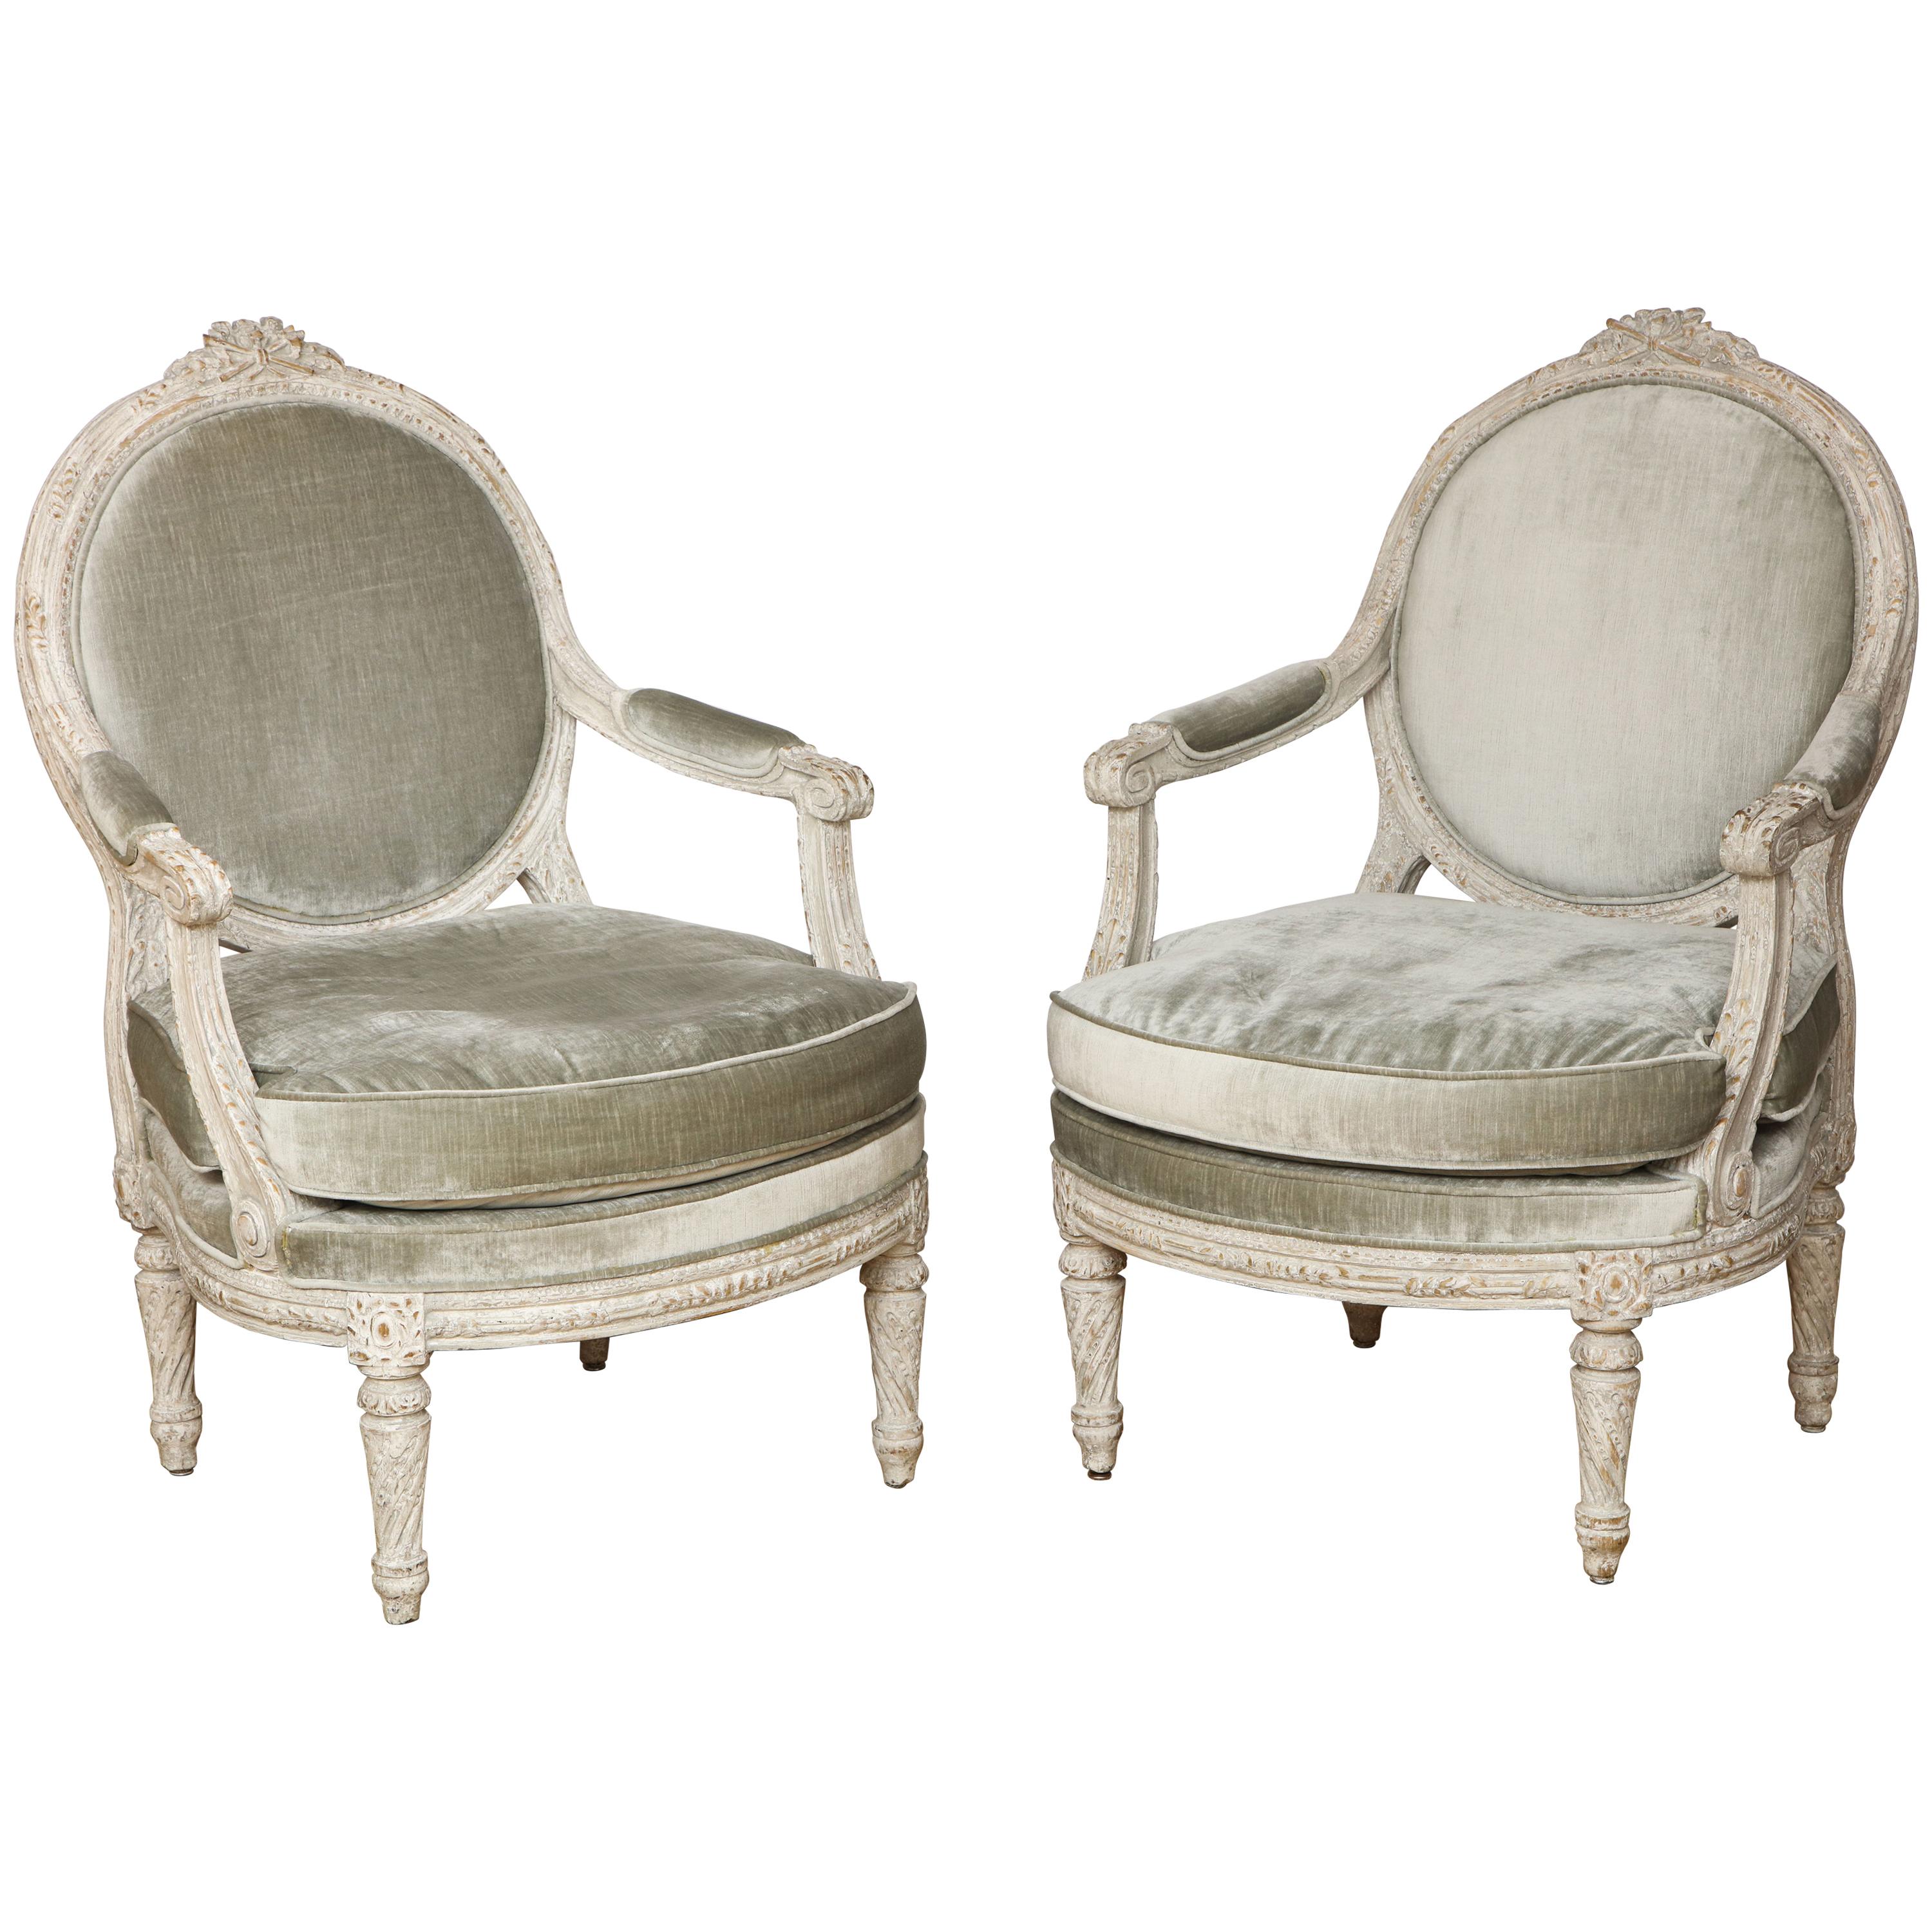 Pair of Grand Italian Neo-Classic Painted Open Armchairs